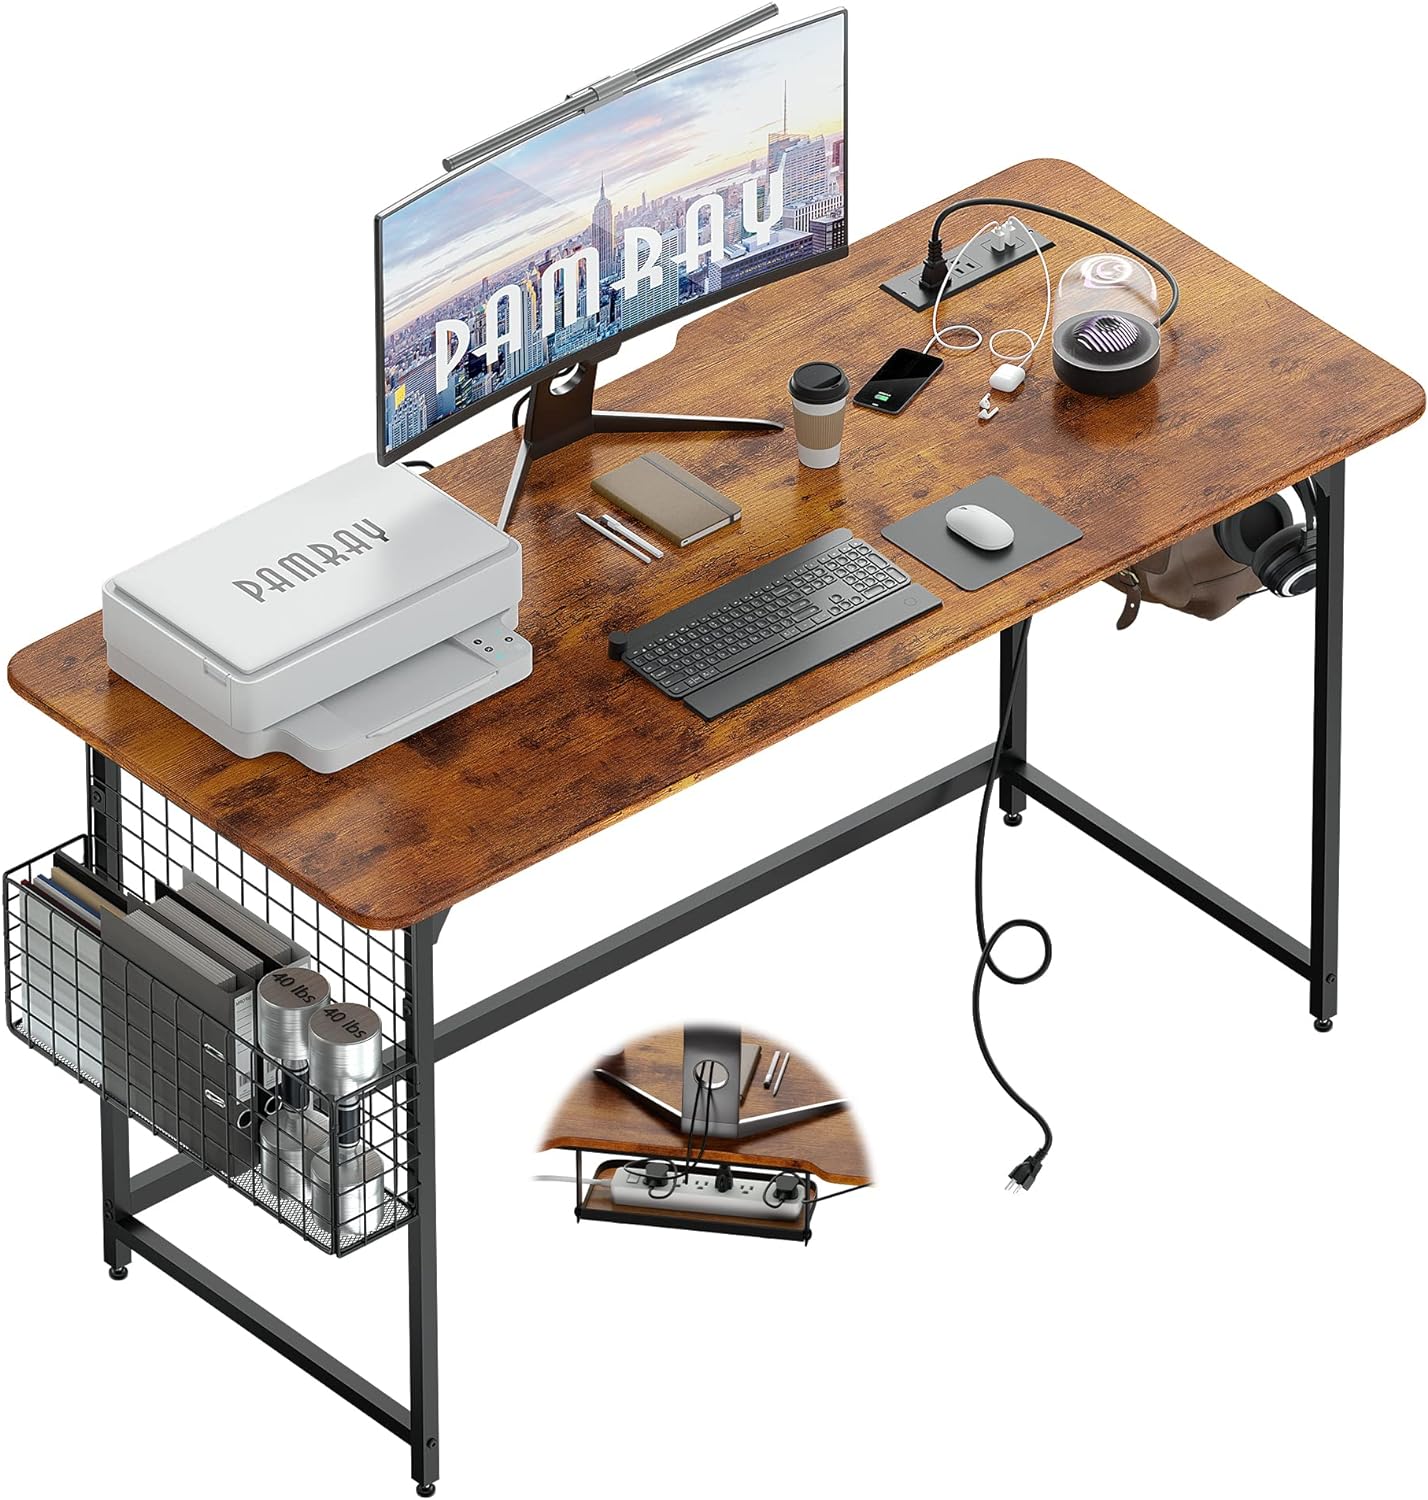 This computer desk fits perfectly into a smaller space, and is both functional and attractive! Easy to assemble with well packaged tools. Price was a bit high but worth it to have easy assembly. Purchased 47 inch size. I definitely recommend!